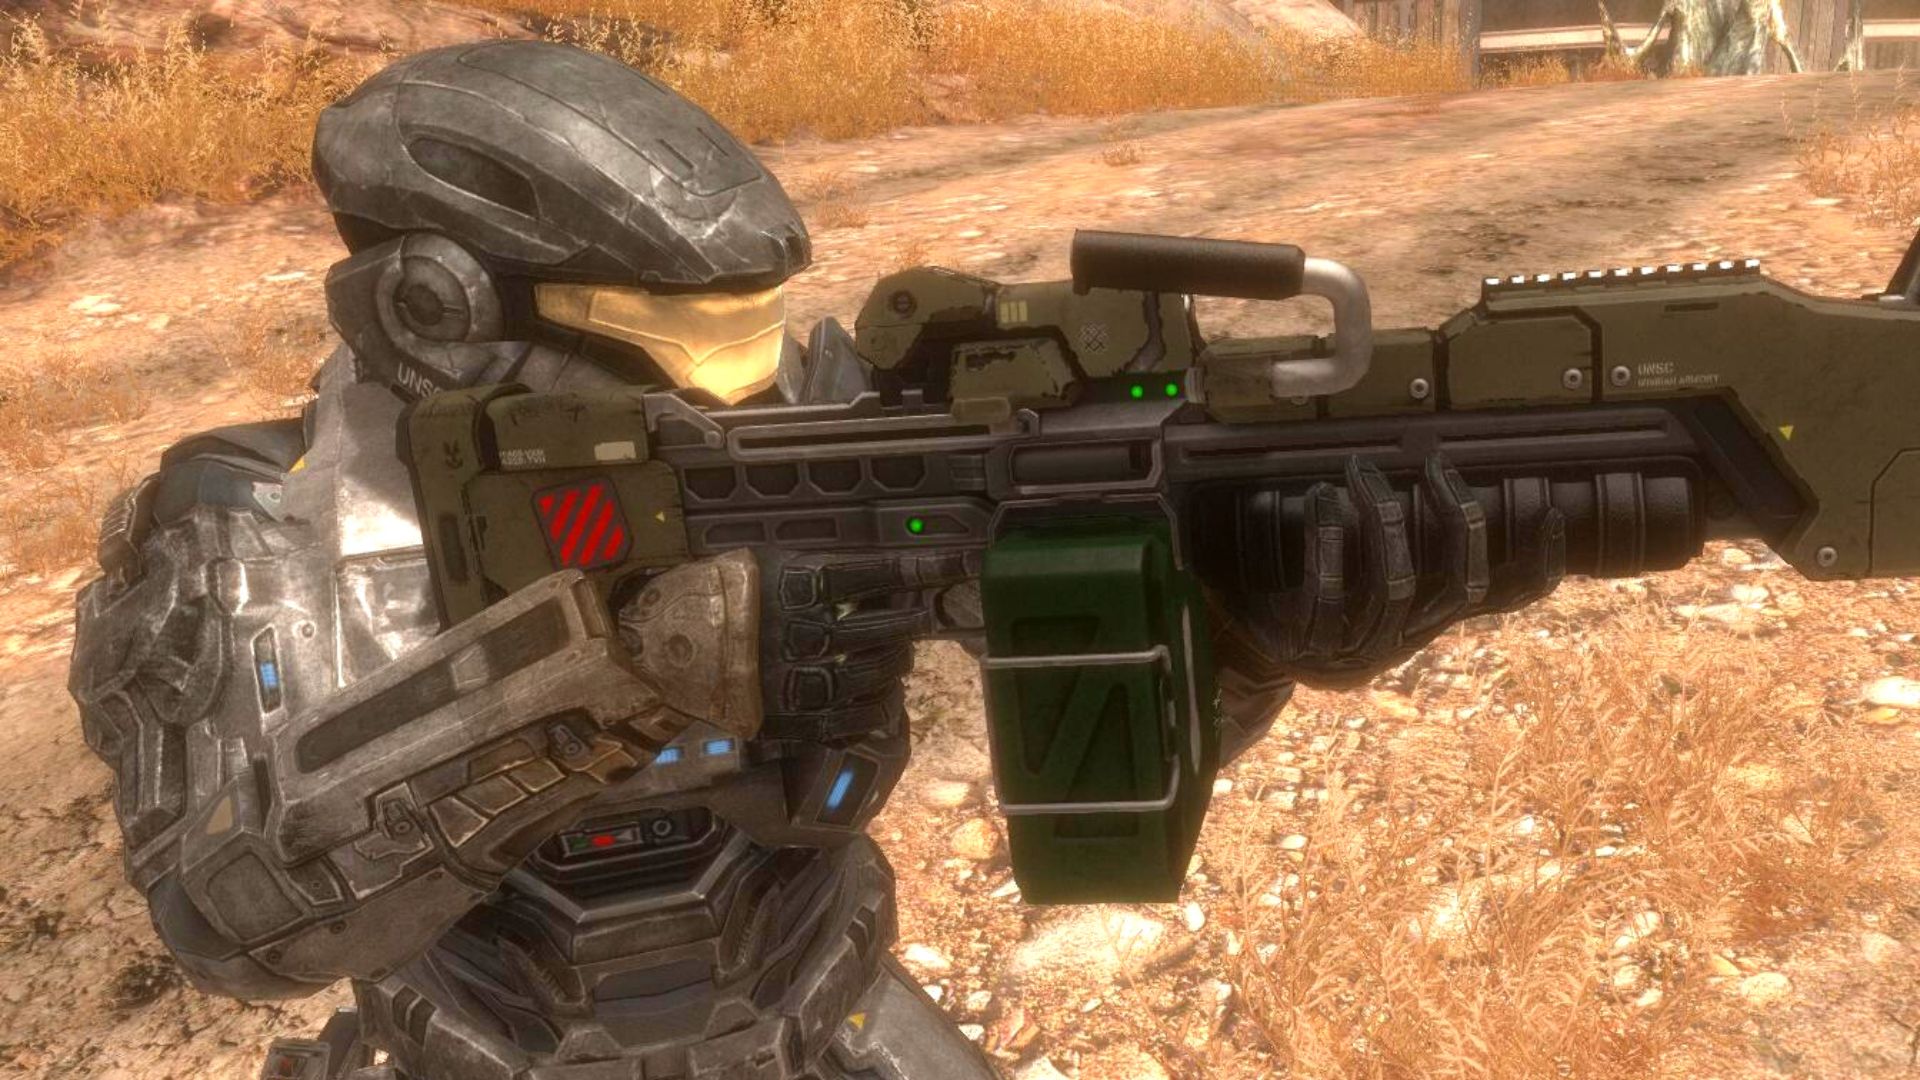 halo weapons